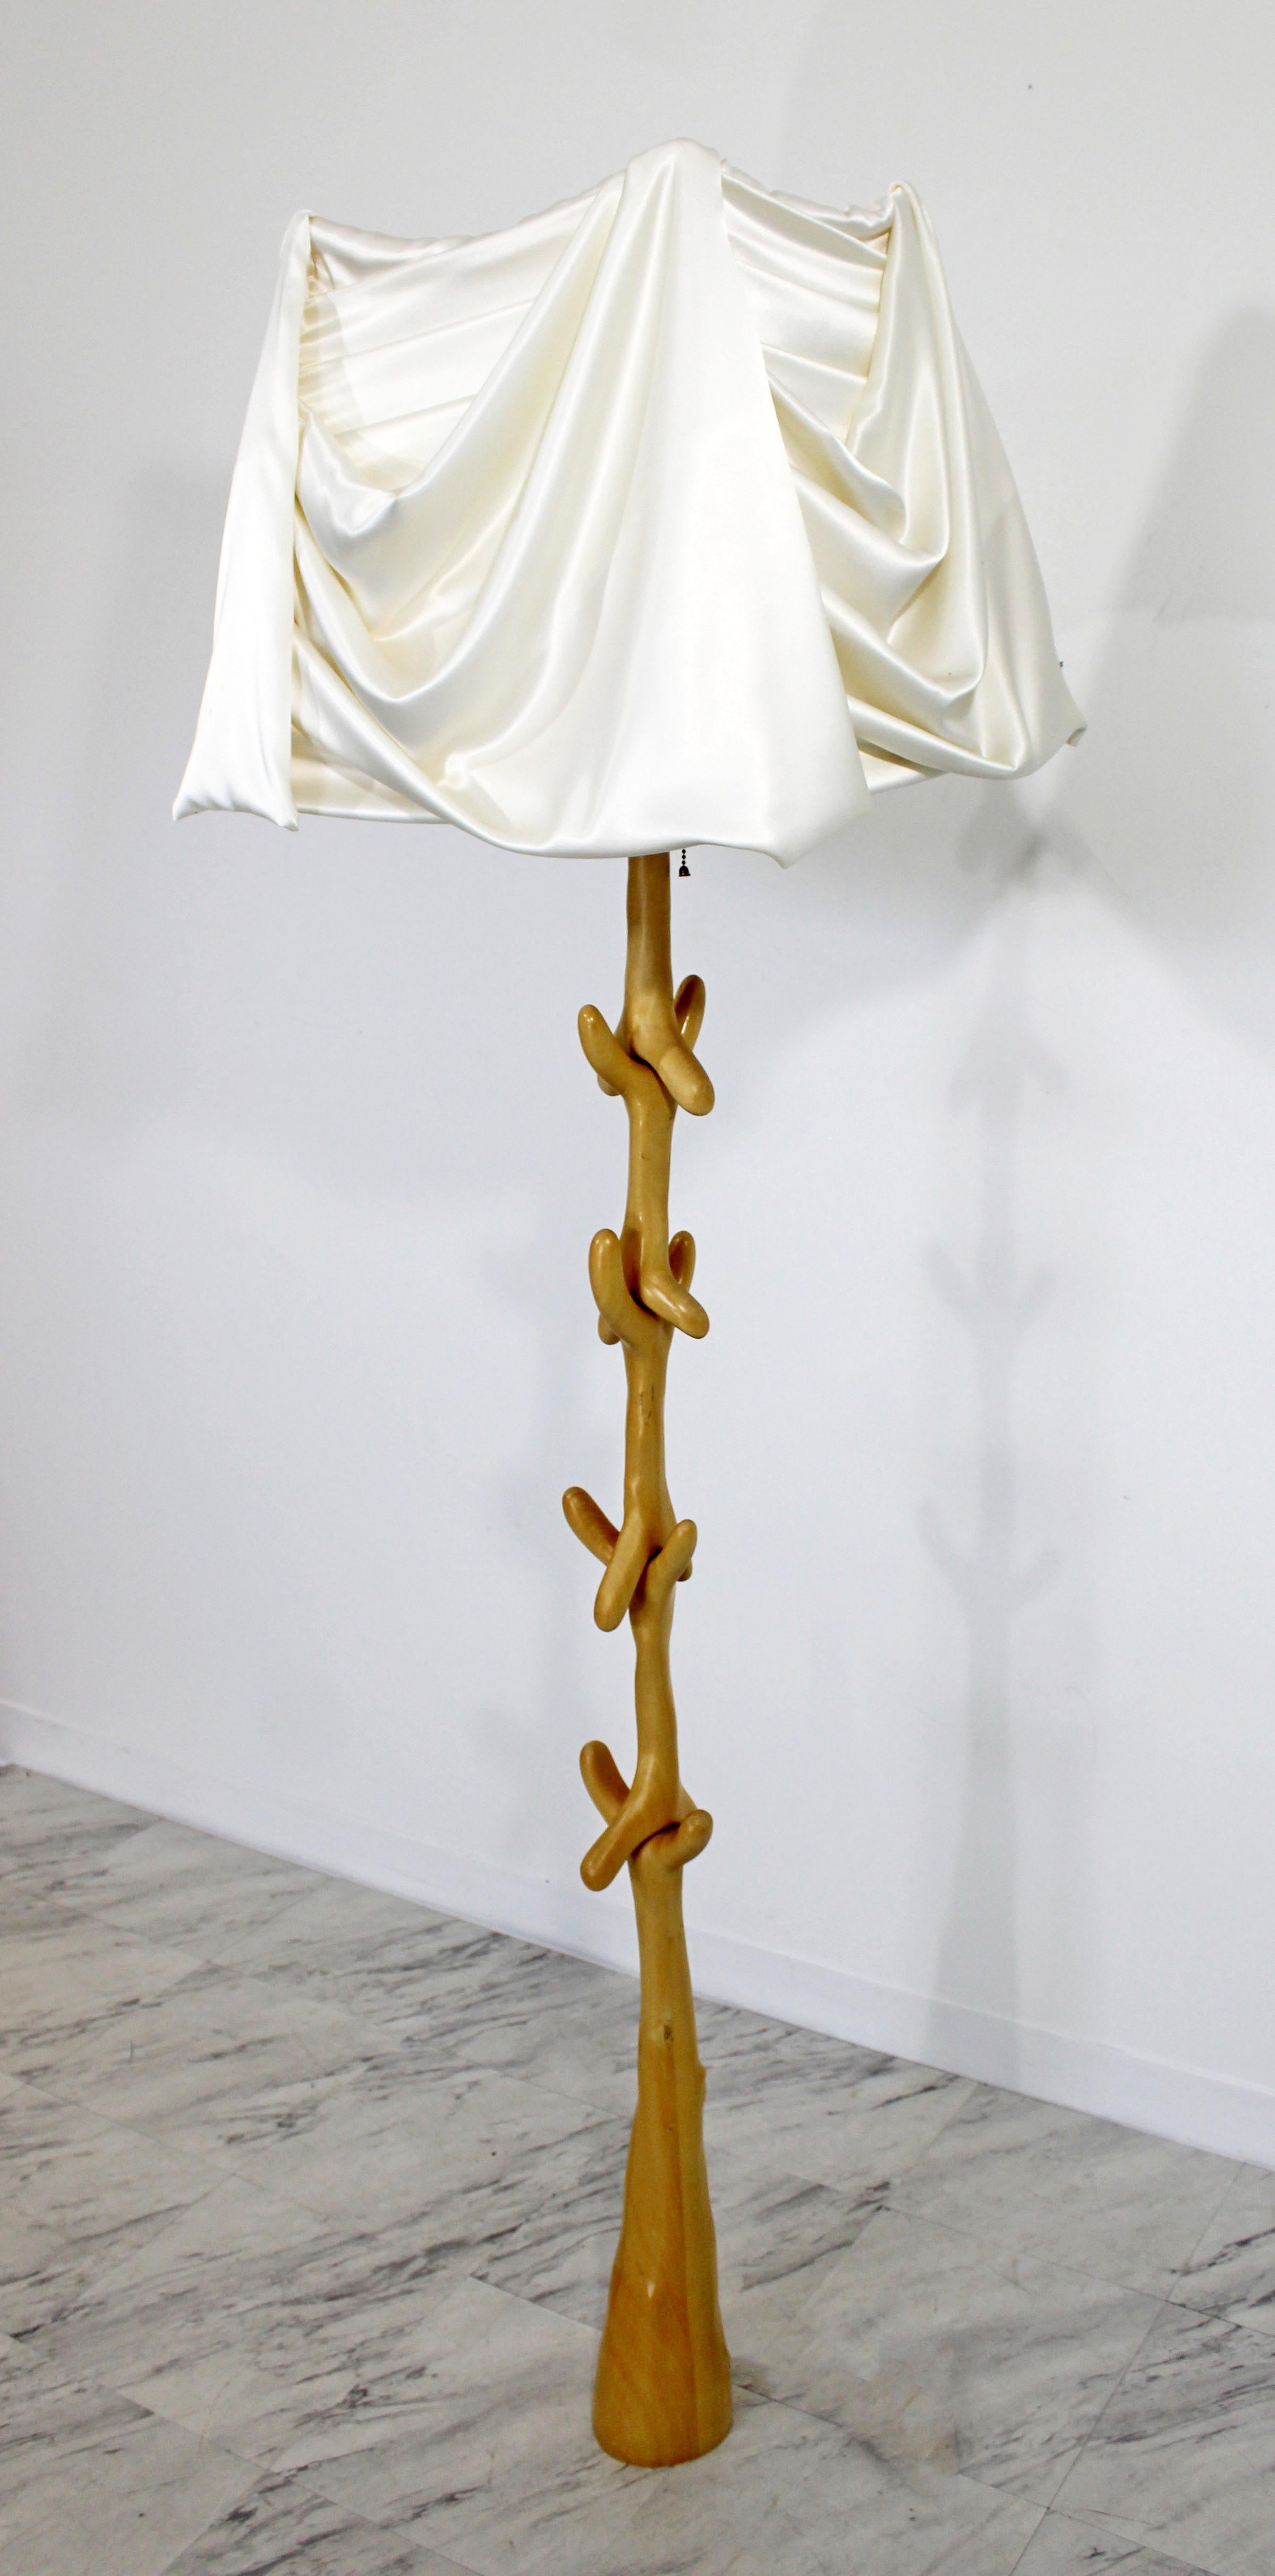 For your consideration is an original, Muletas floor lamp, made of wood and with the original textile linen shade, designed by Salvador Dali and produced by BD Barcelona in Spain. Lamp is in excellent condition, the shade has a few spots that are